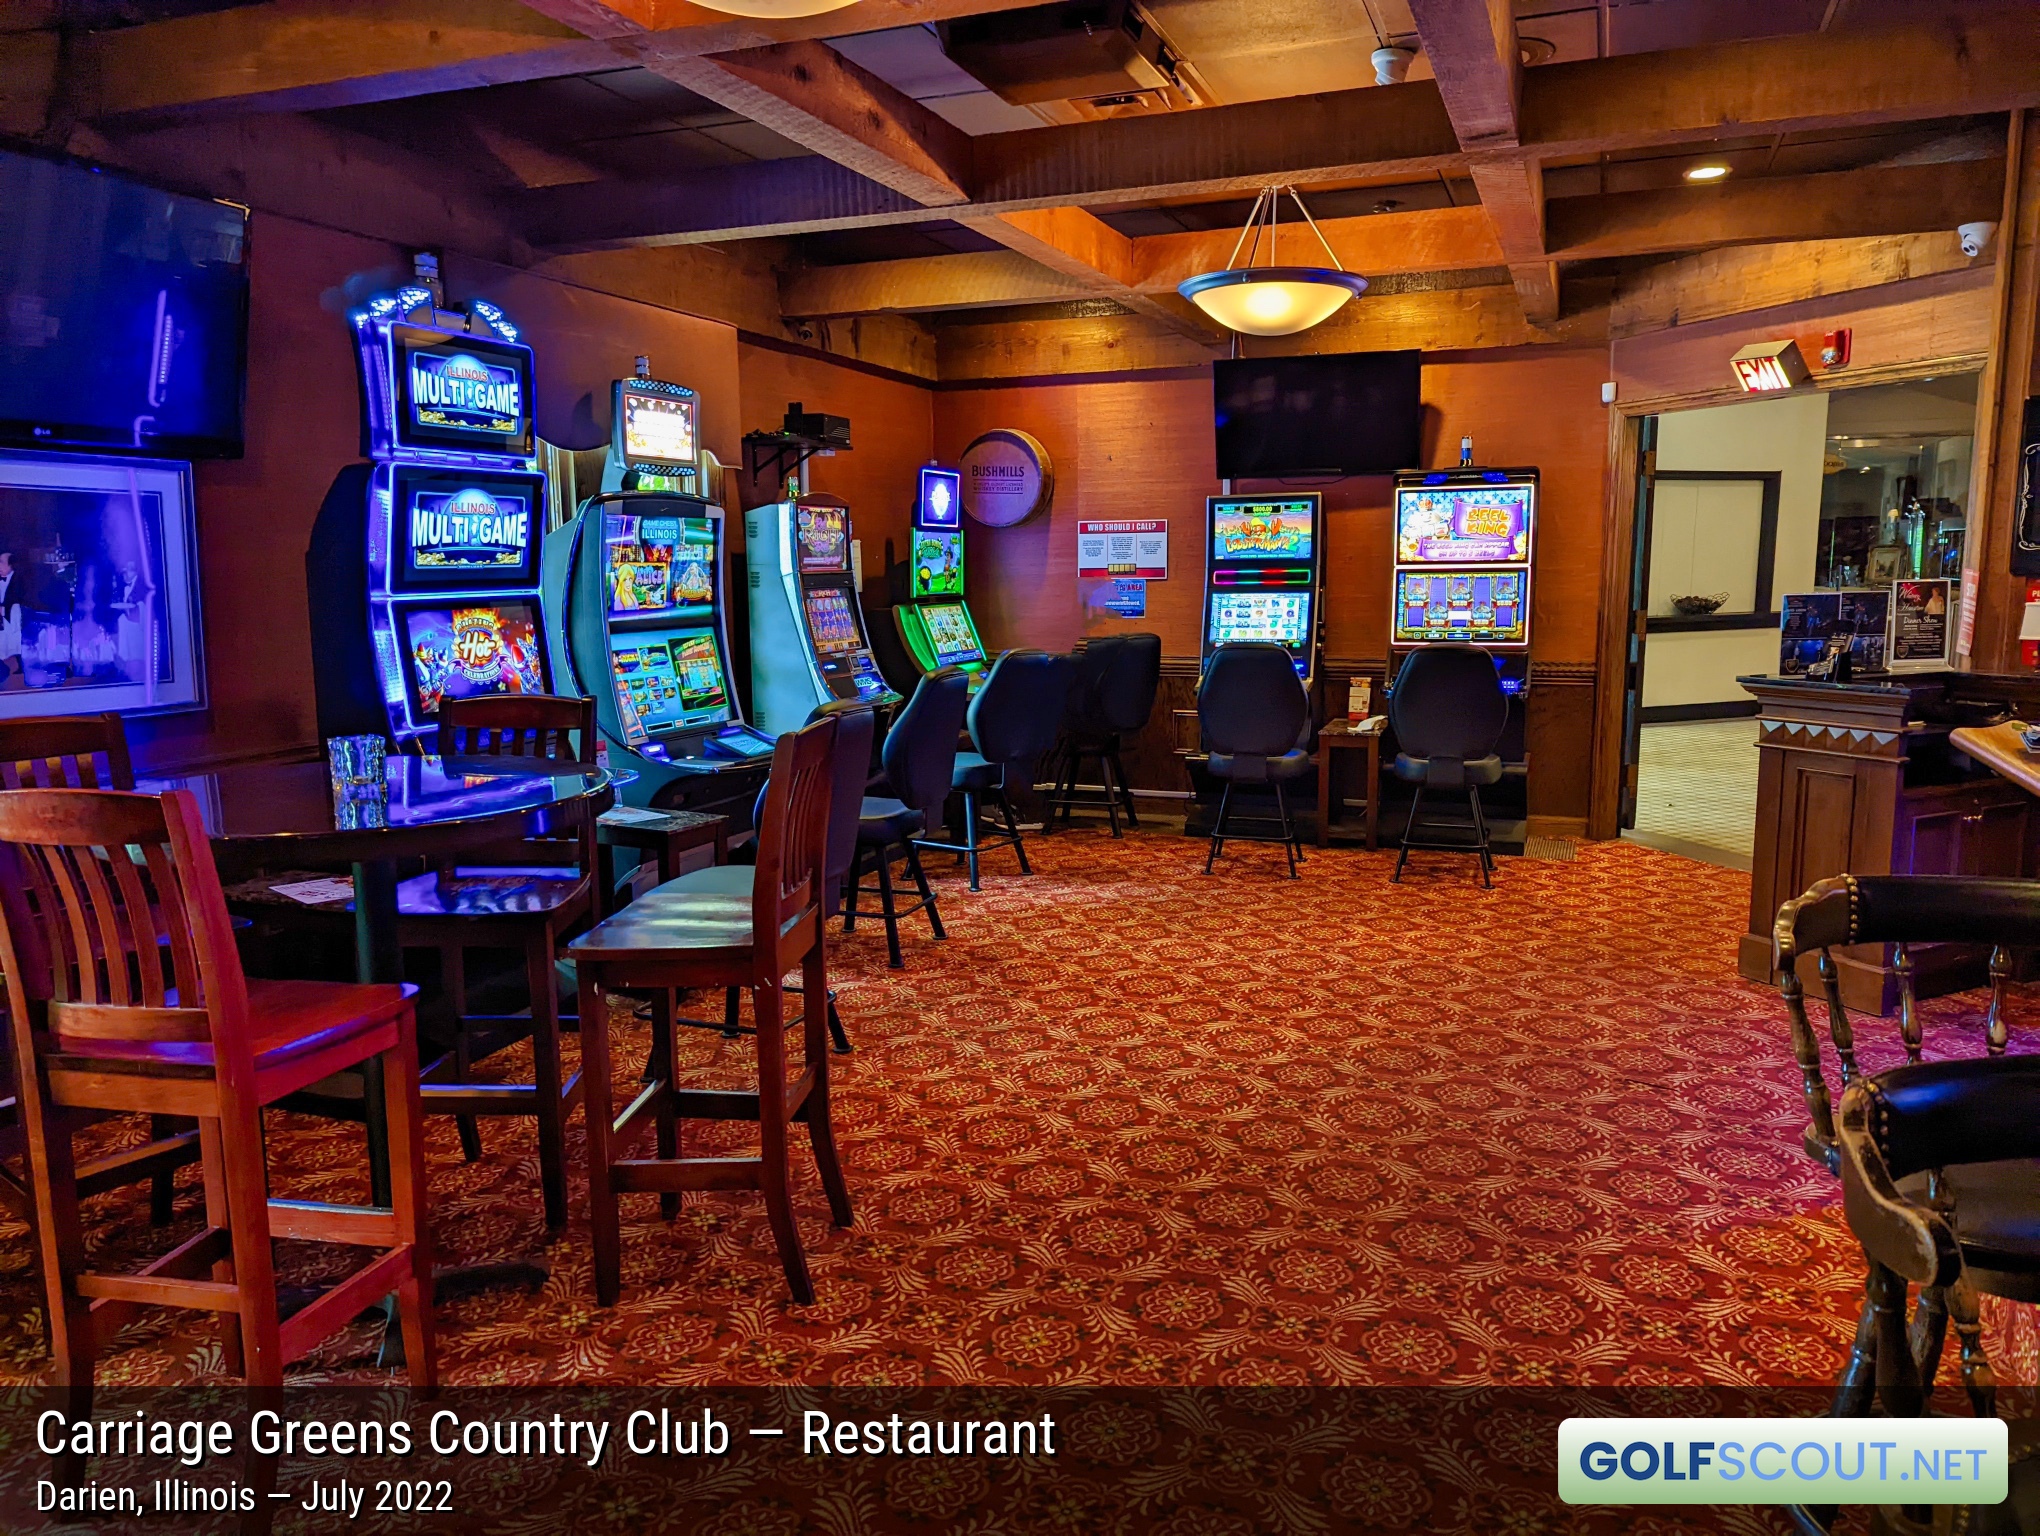 Photo of the restaurant at Carriage Greens Country Club in Darien, Illinois. There's a gambling area in the corner.